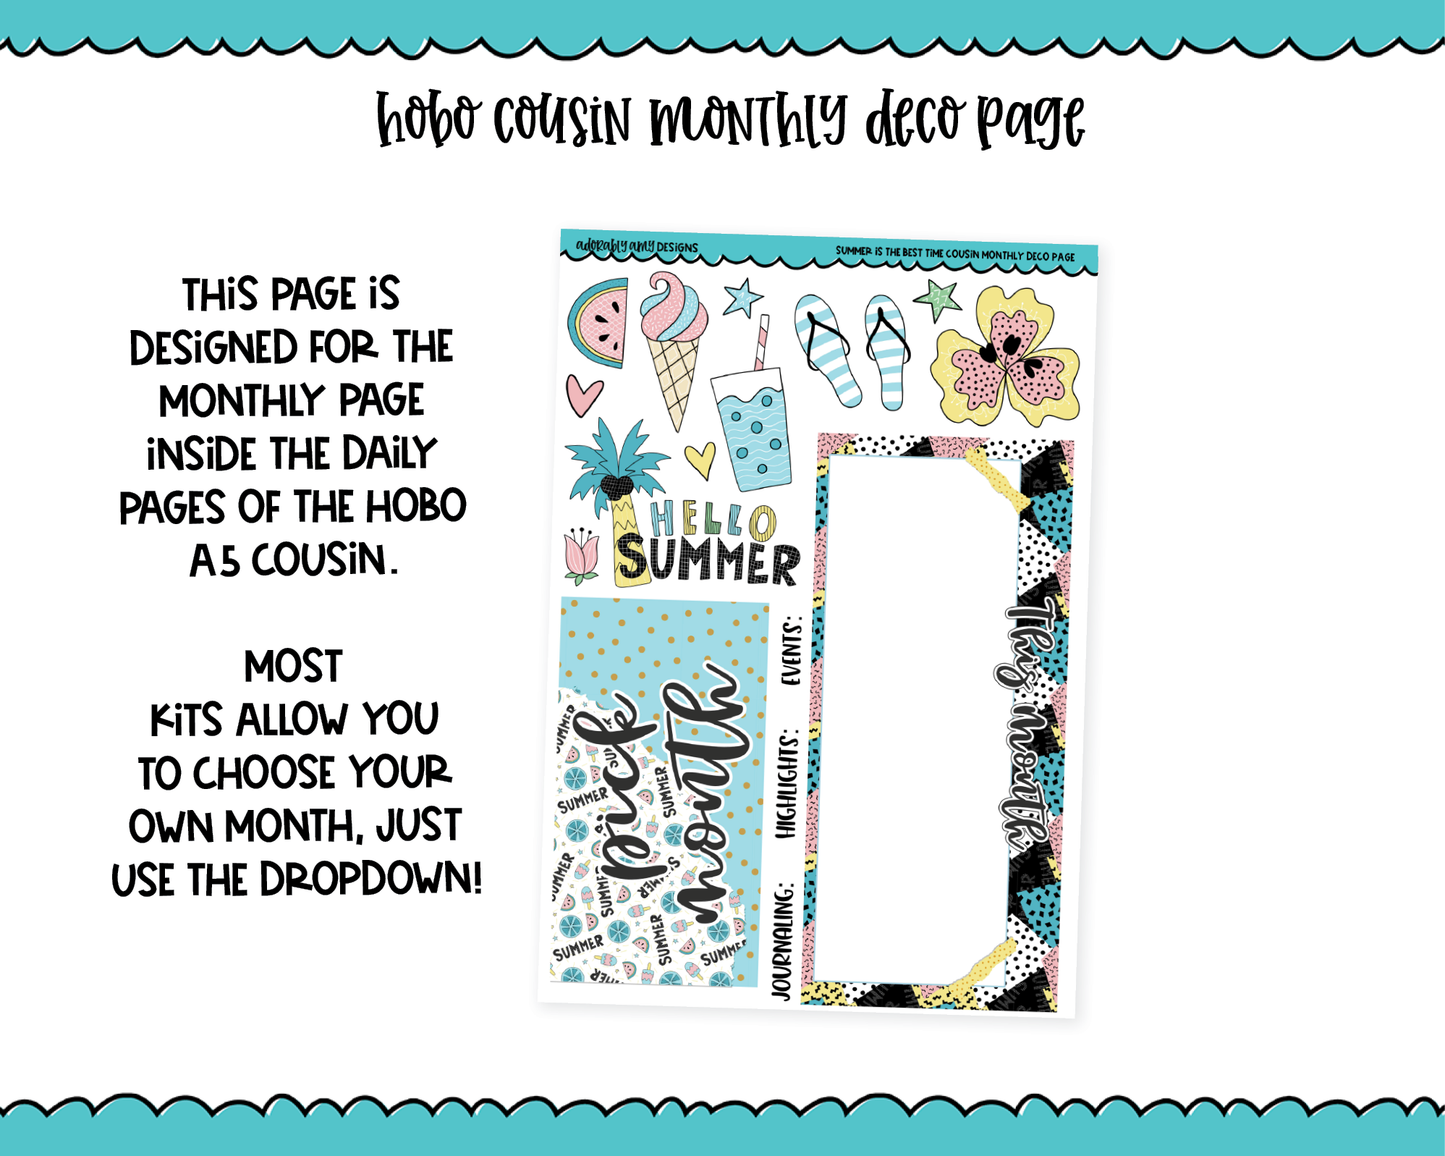 Hobonichi Cousin Monthly Pick Your Month Summer is the Best Time Themed Planner Sticker Kit for Hobo Cousin or Similar Planners